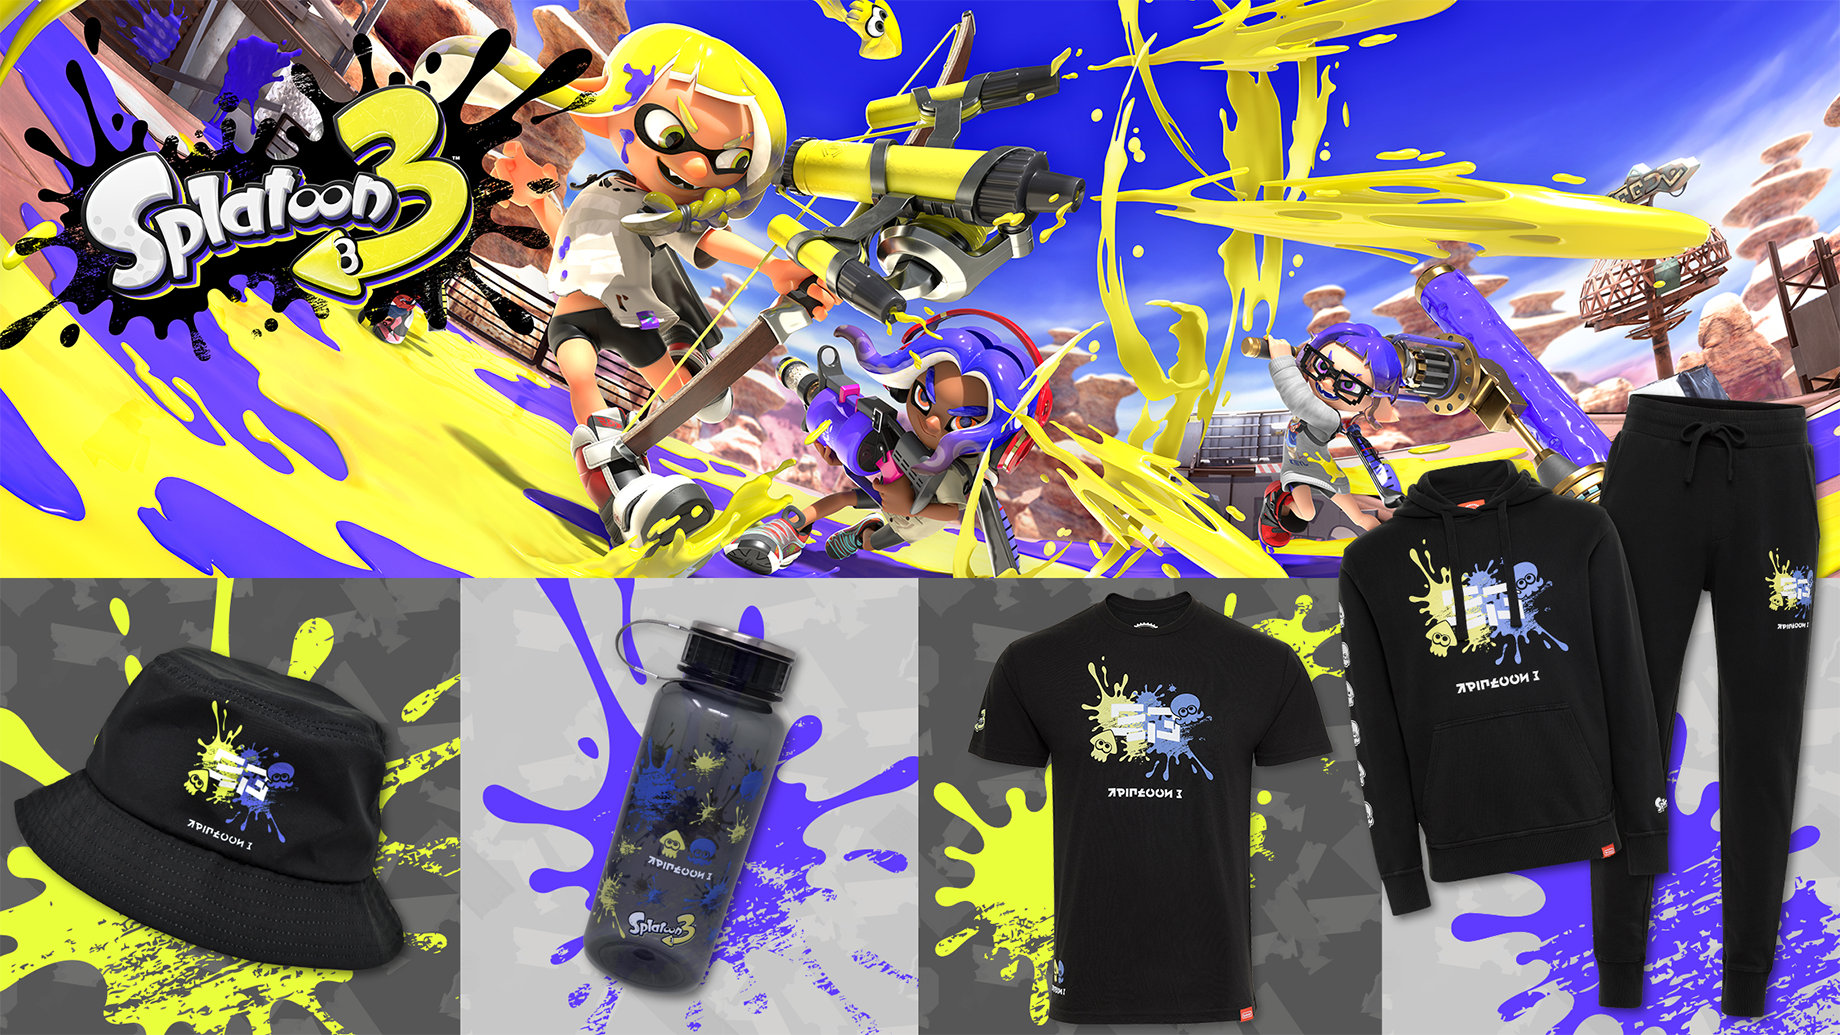 Shop exclusive (and stylish) Splatoon 3 merch in the My Nintendo Store